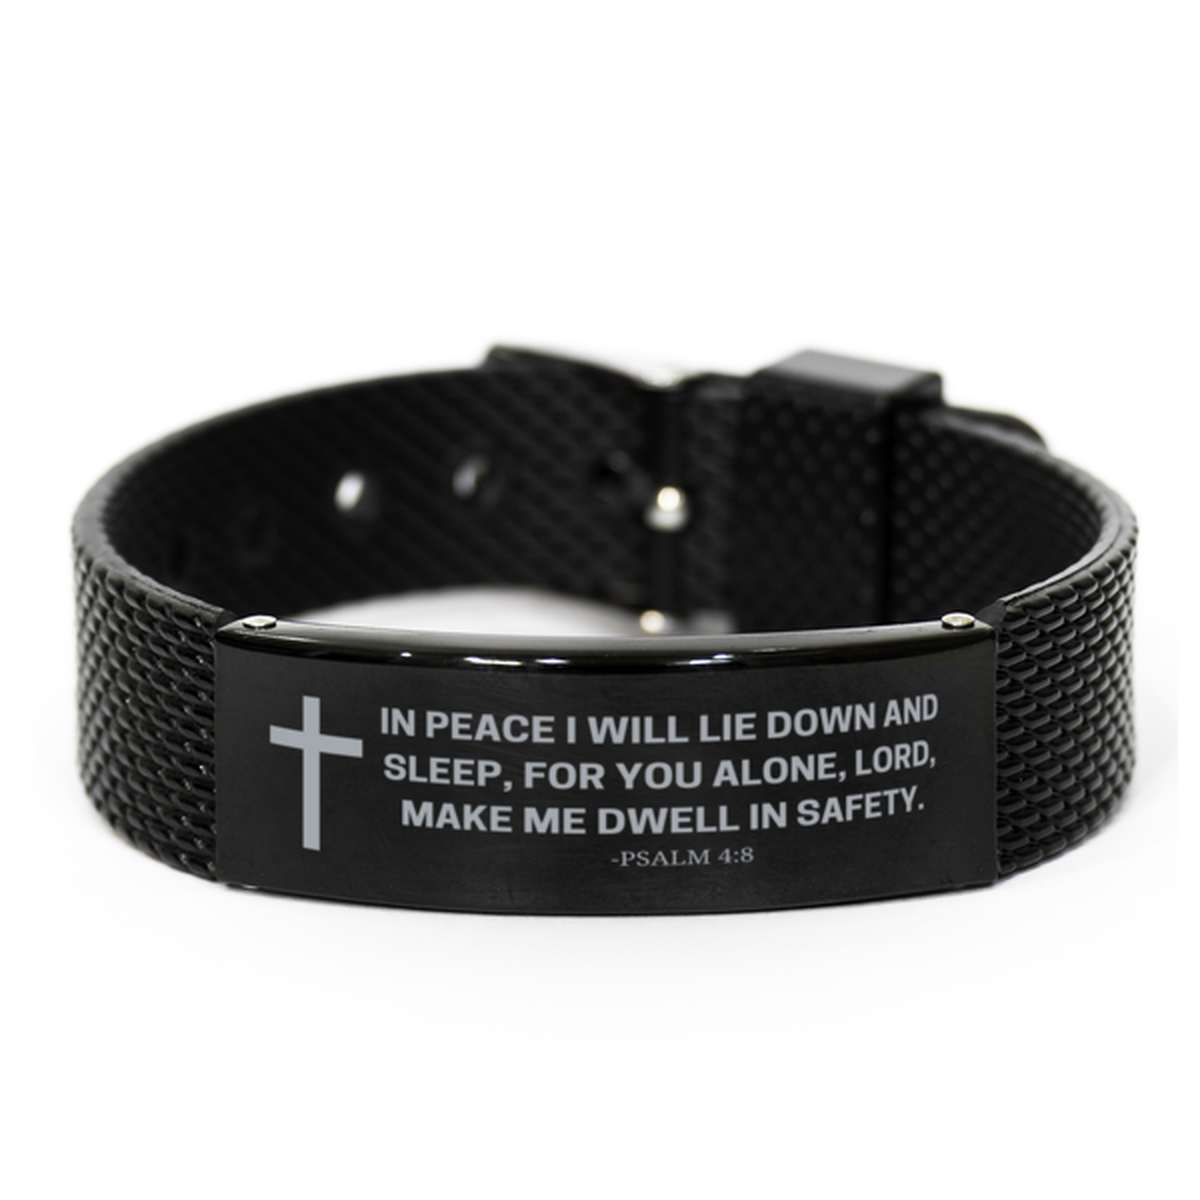 Baptism Gifts For Teenage Boys Girls, Christian Bible Verse Black Shark Mesh Bracelet, In peace I will lie down and sleep, Catholic Confirmation Gifts for Son, Godson, Grandson, Nephew